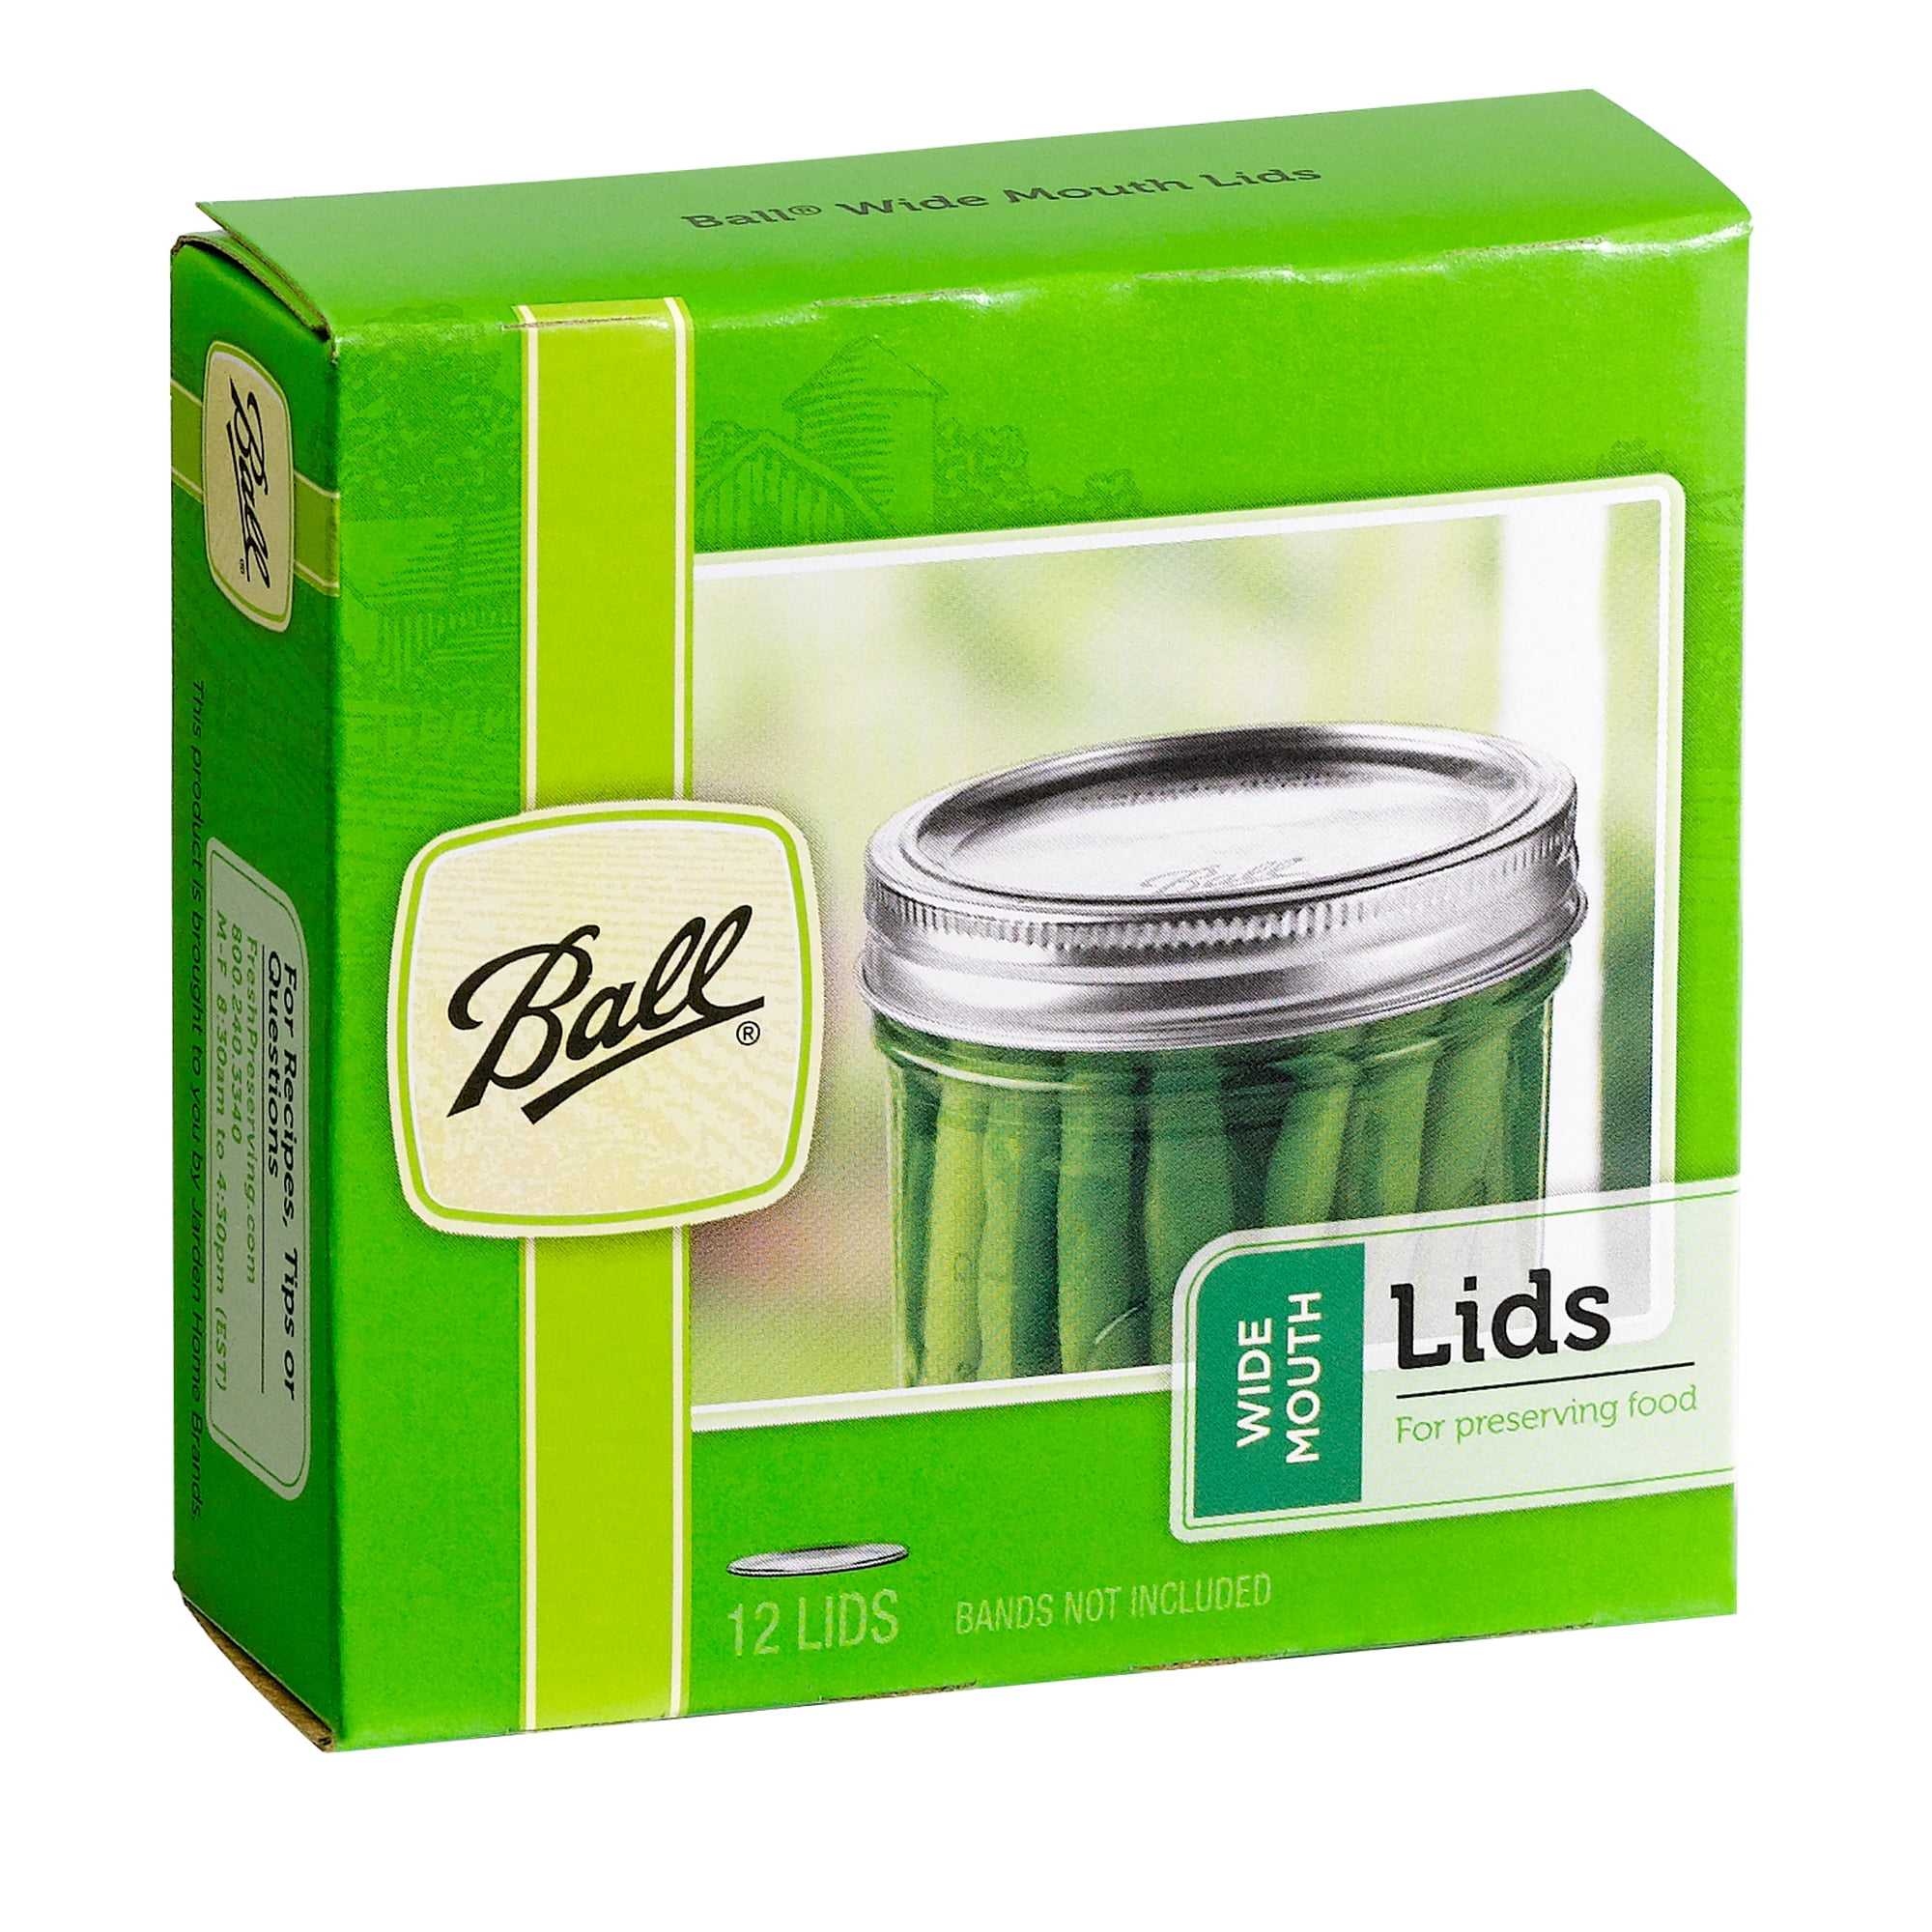 Pack of 2 Ball Jars Wide Mouth Lids 12 Count